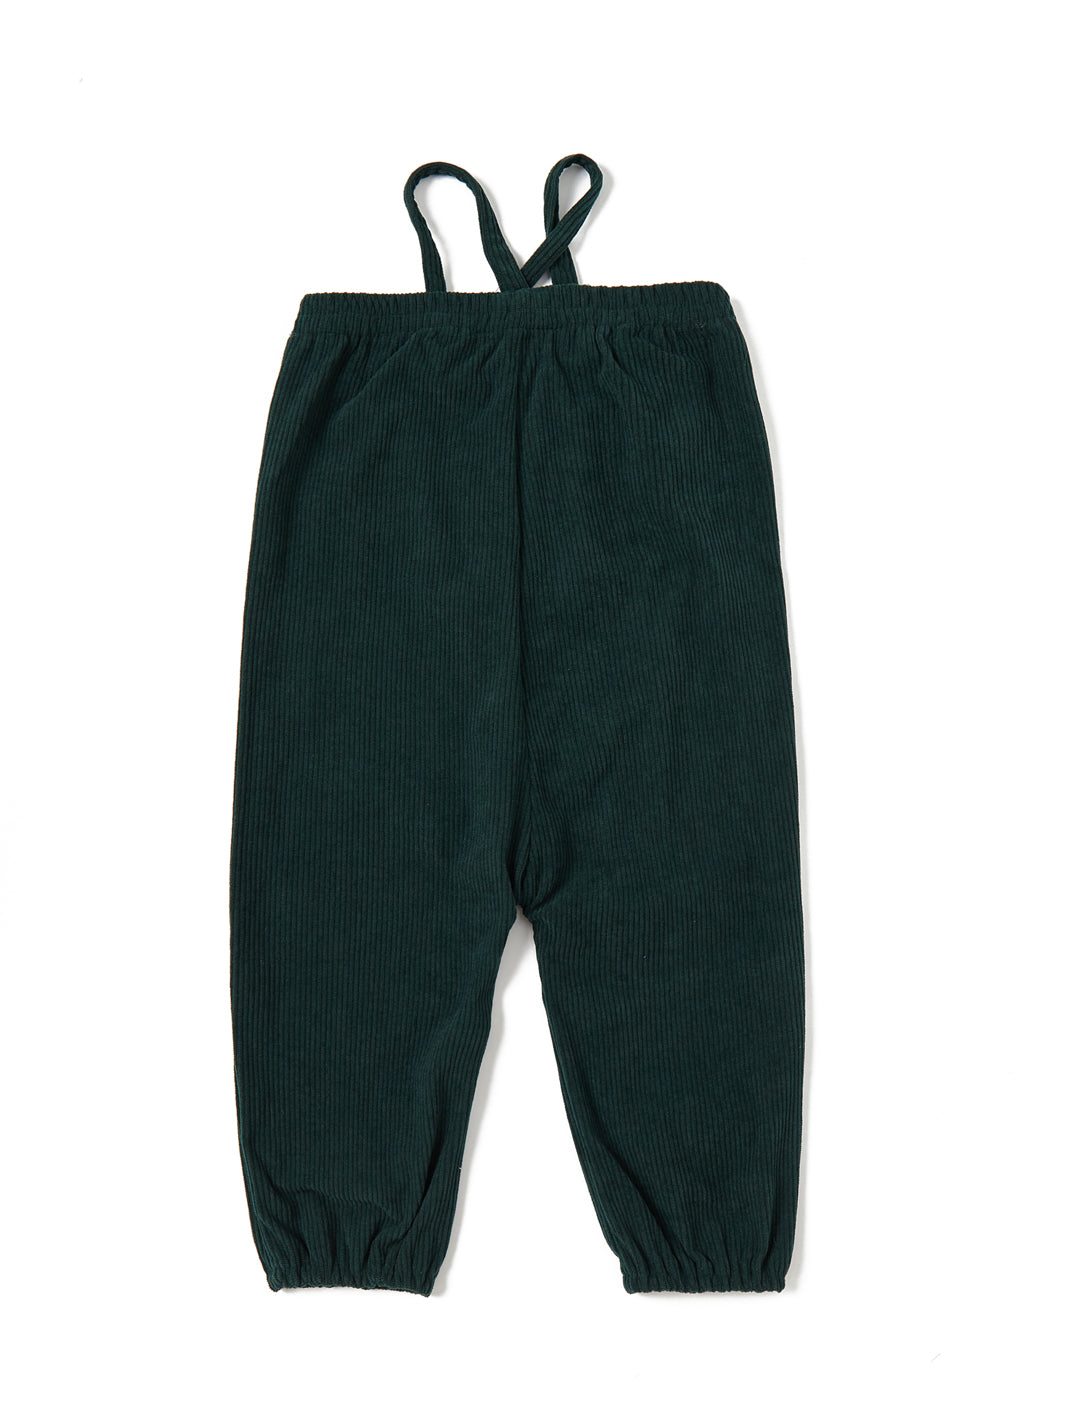 Baby elastic overall - Green